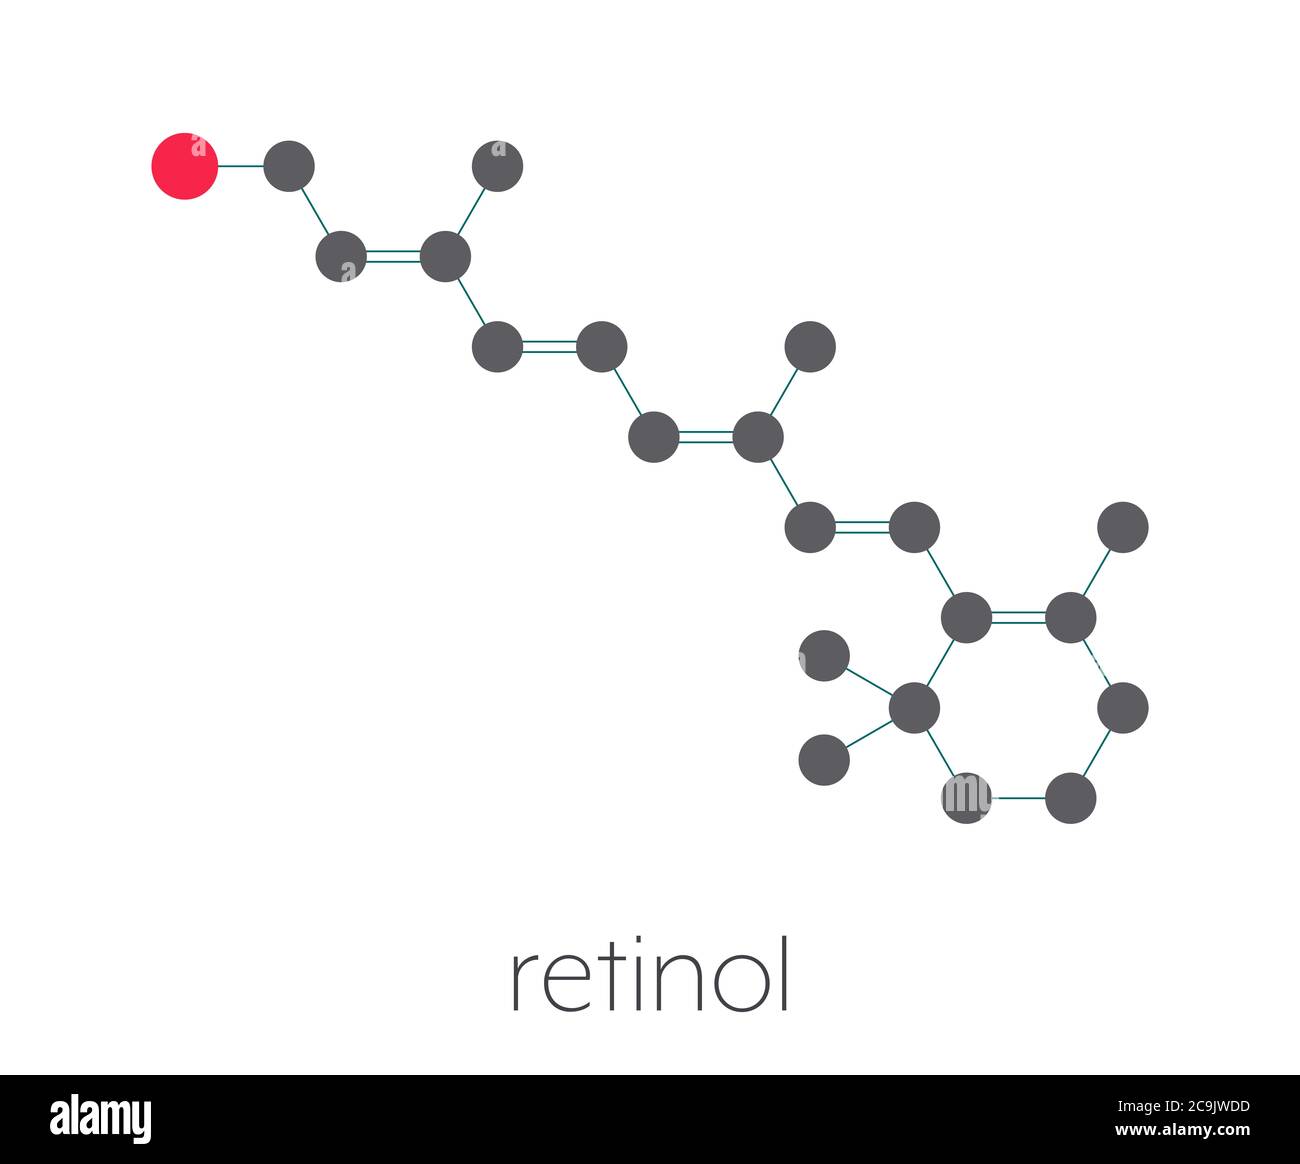 Vitamin A (retinol) molecule. Stylized skeletal formula (chemical structure). Atoms are shown as color-coded circles connected by thin bonds, on a whi Stock Photo